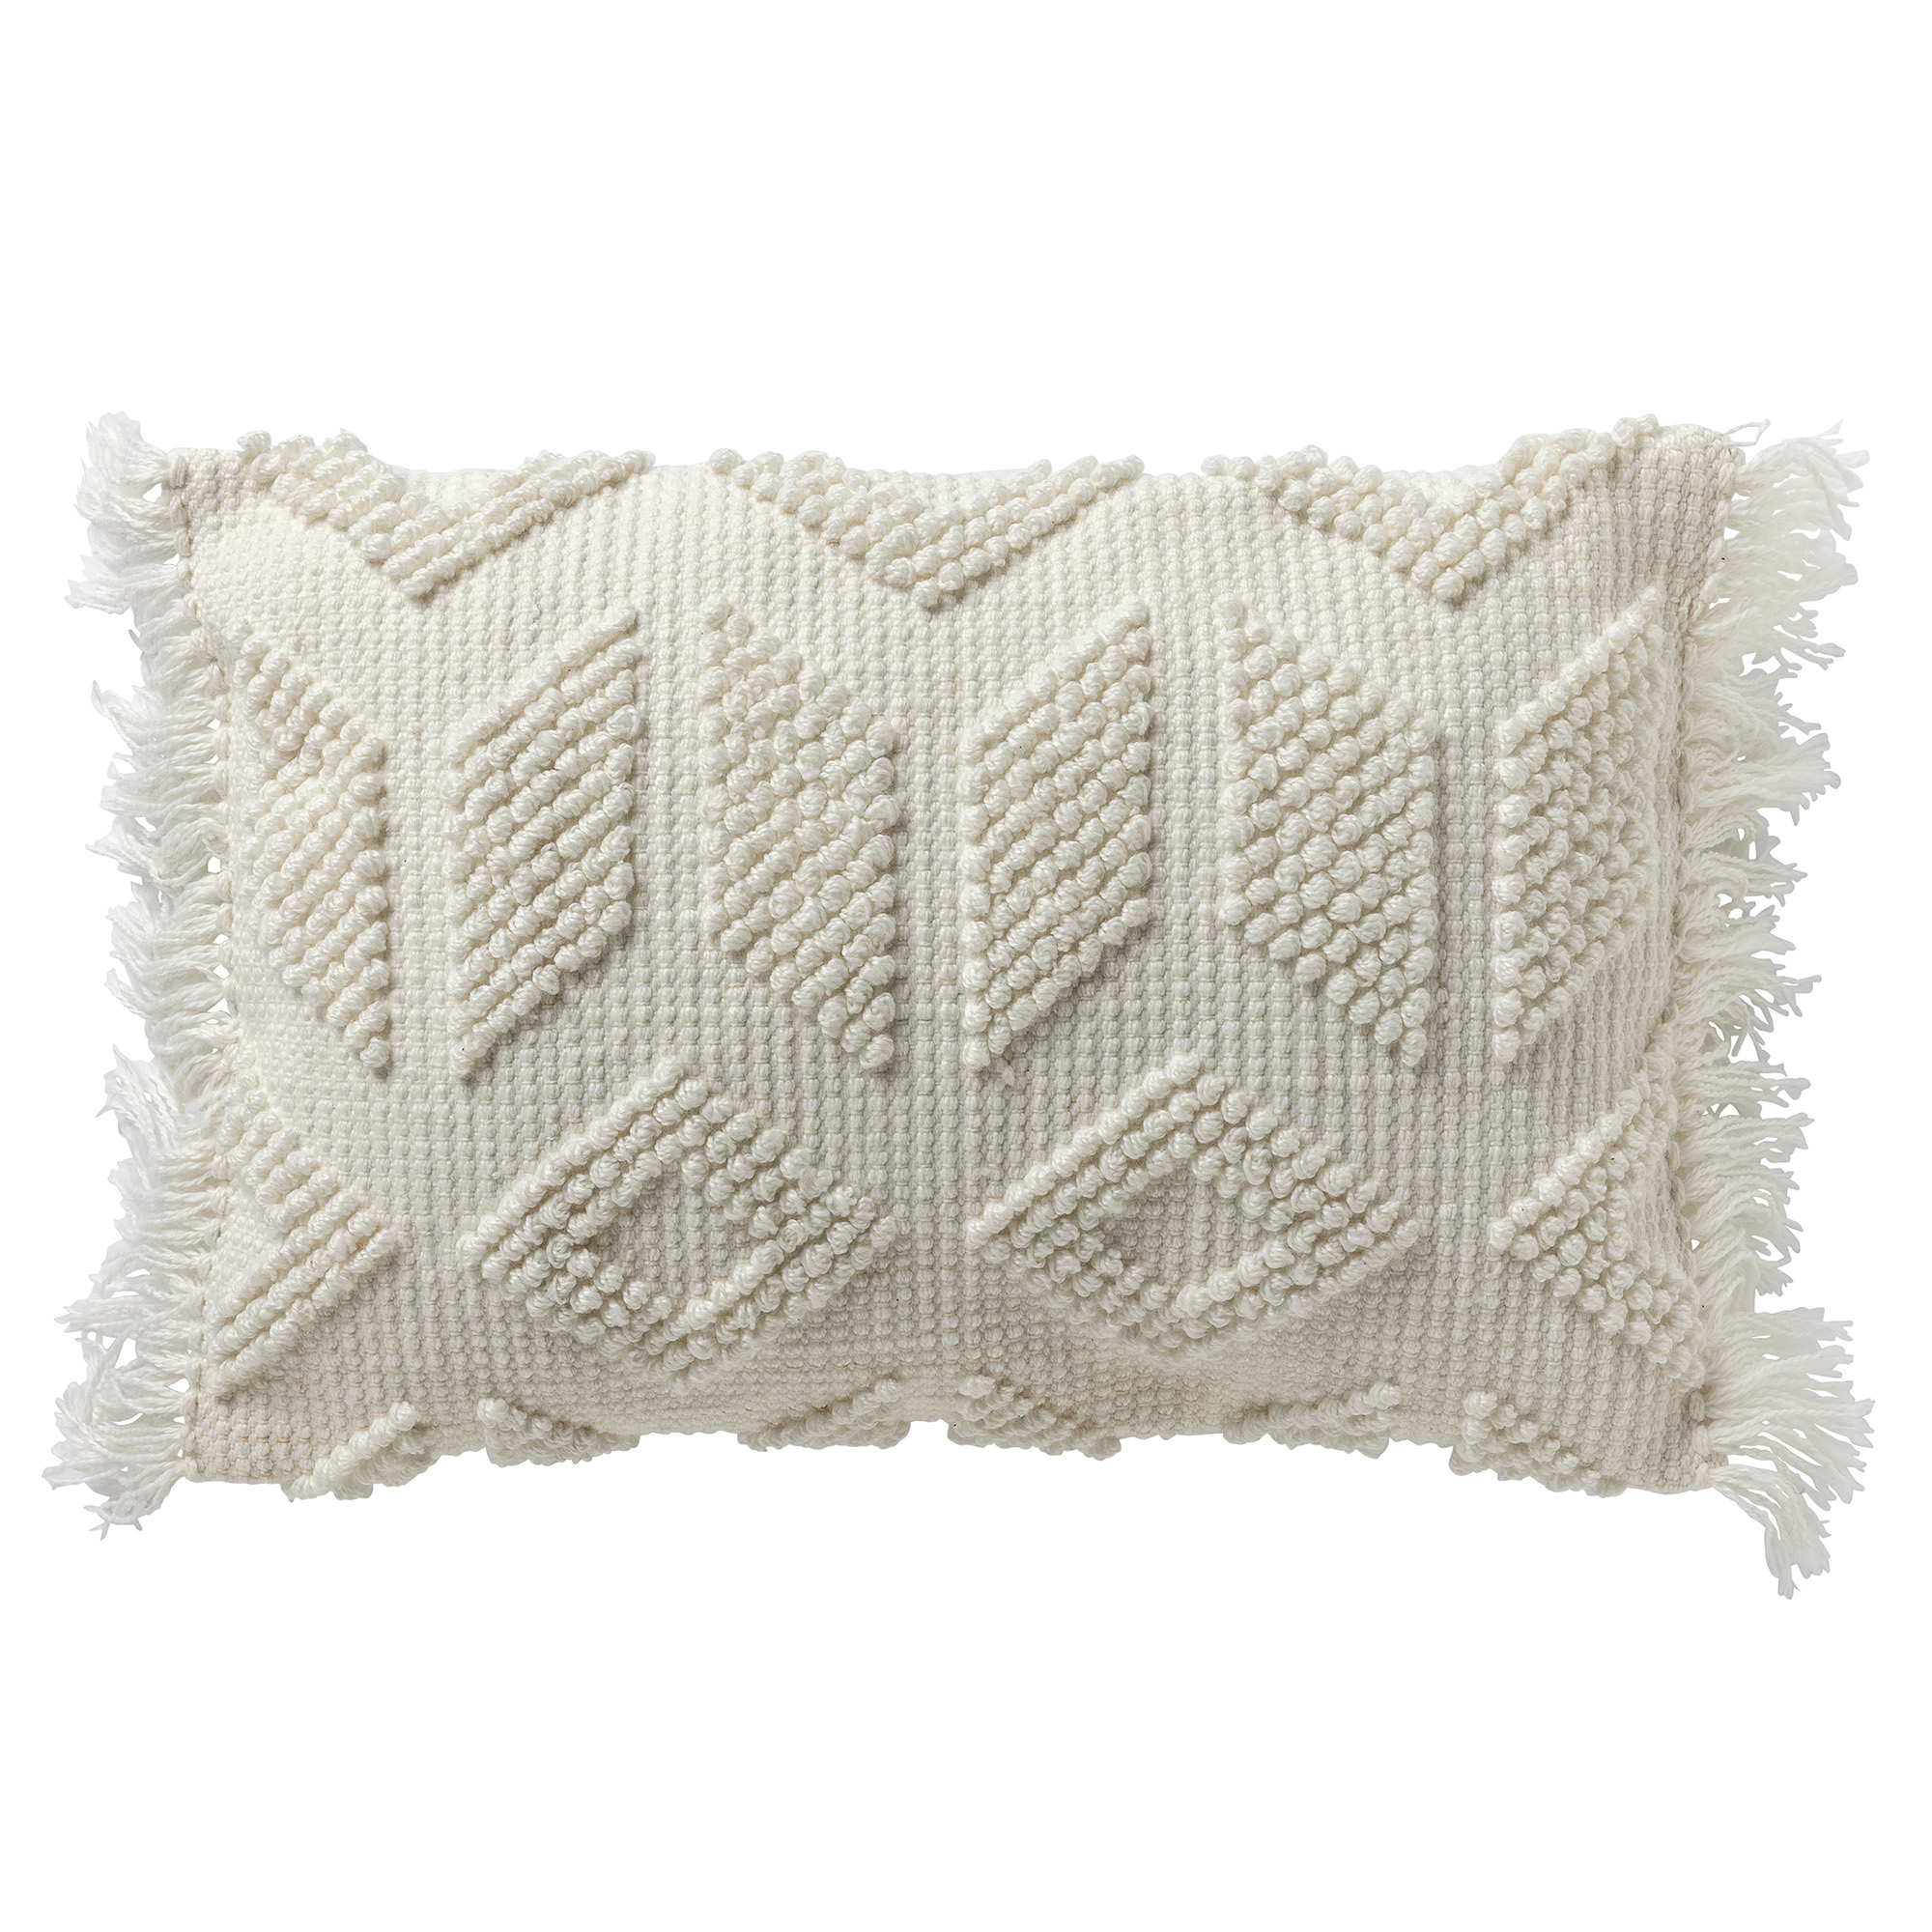 ODIN - Cushion with cushion cover made of 90% recycled polyester - Eco Line collection 40x60 cm - Snow White - white